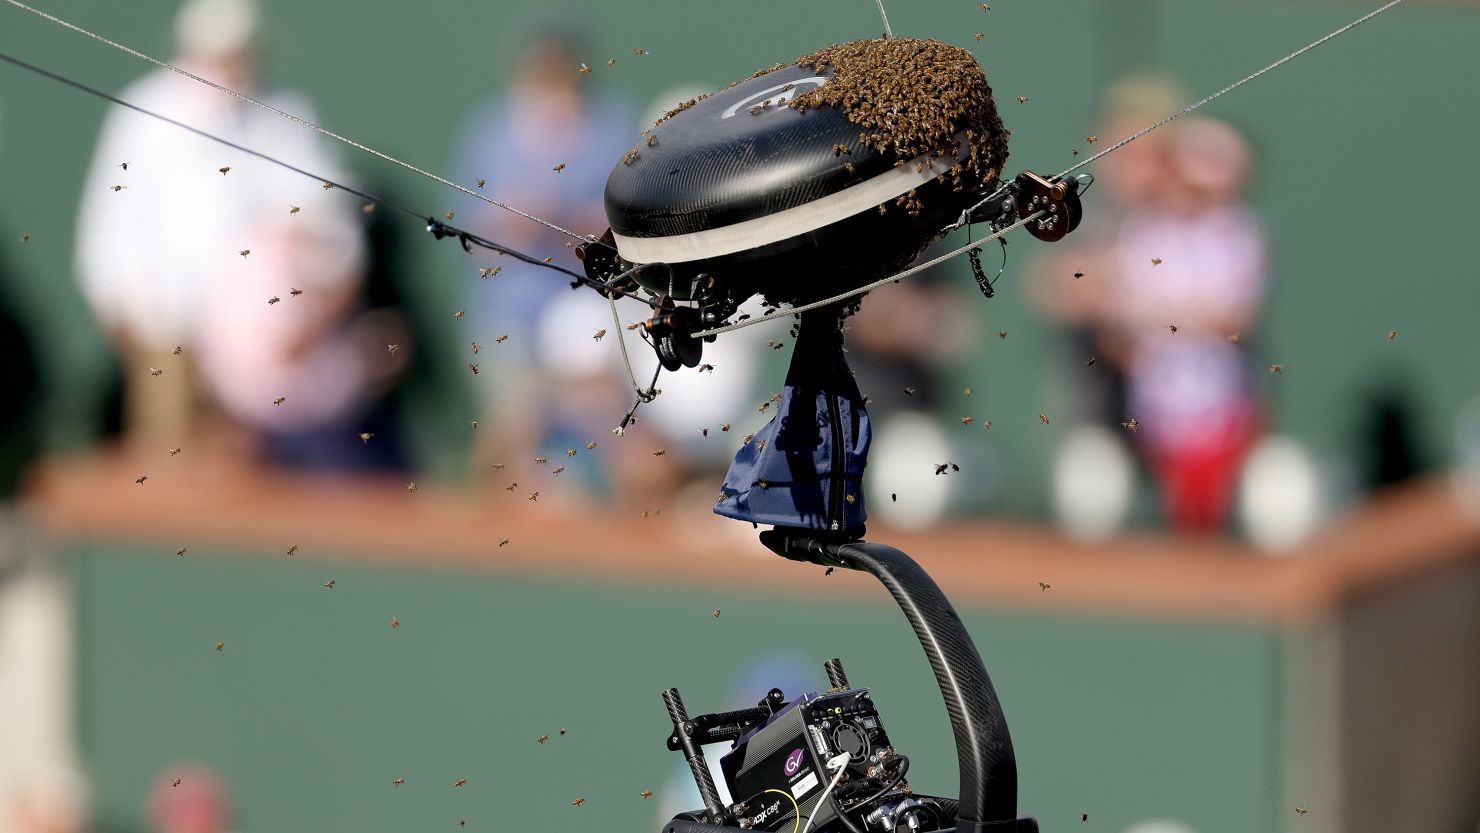 A swarm of bees caused a lengthy delay to a quarterfinal match at this year's Indian Wells.